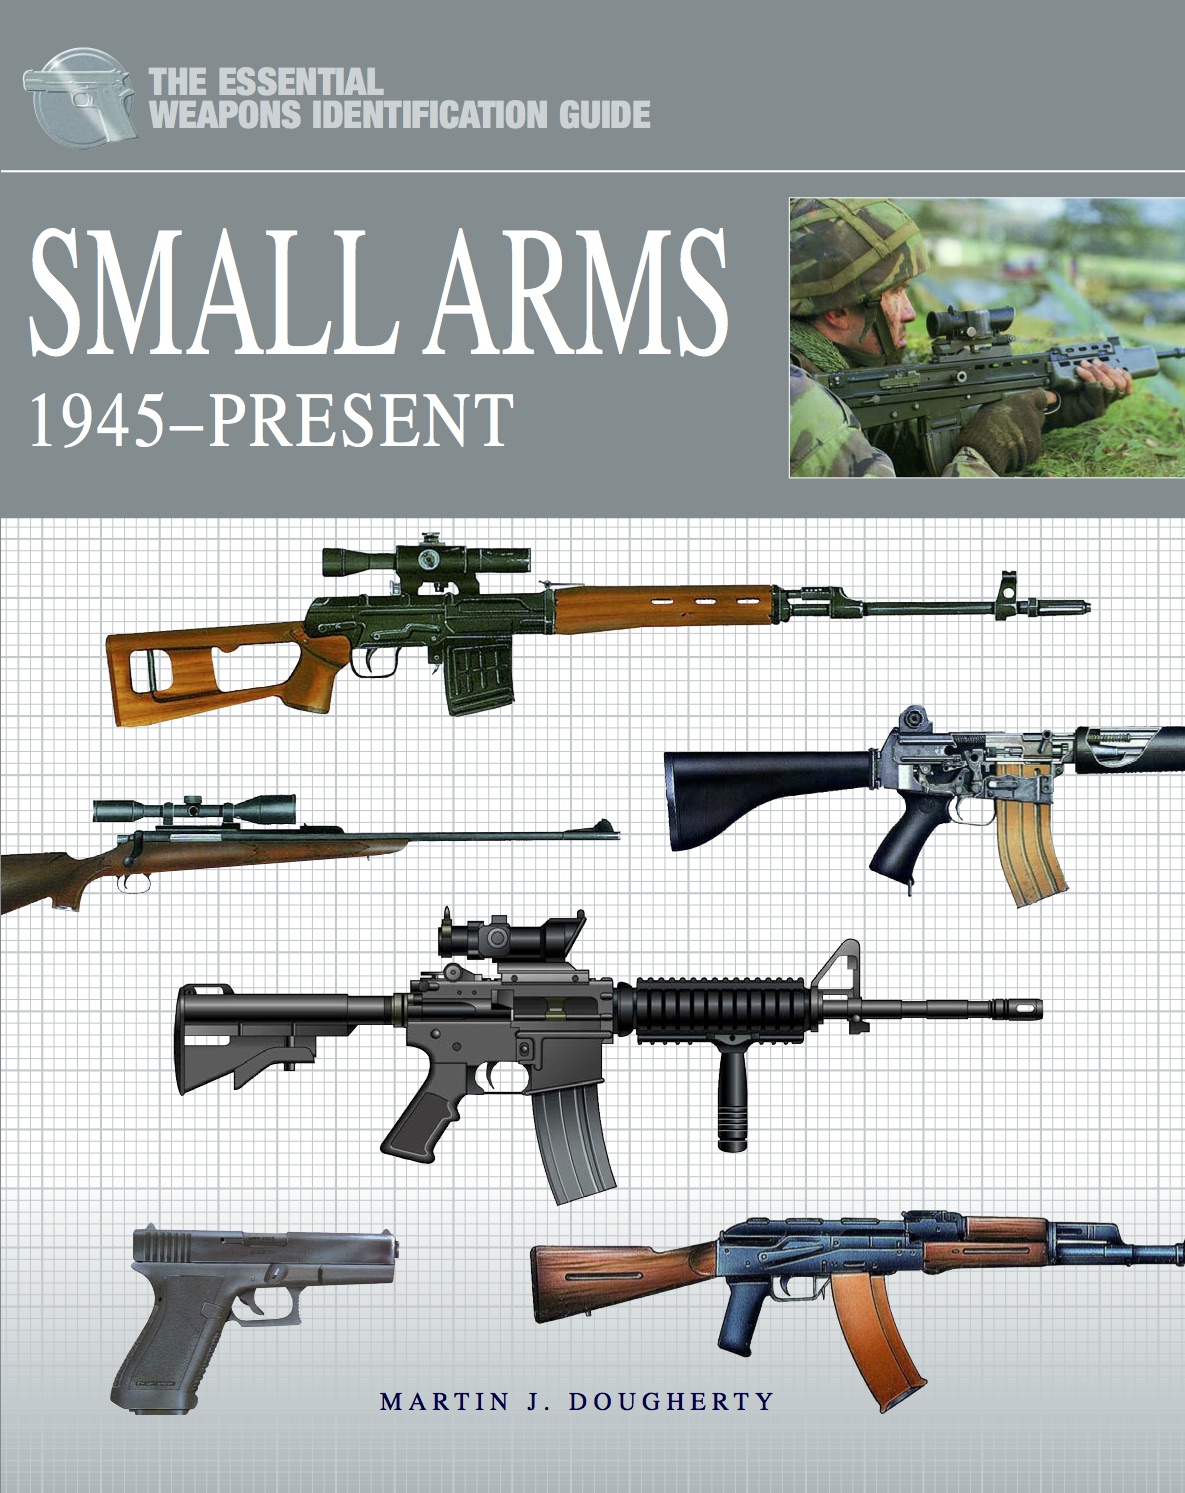 Small Arms 1945-Present: The Essential Weapons Identification Guide